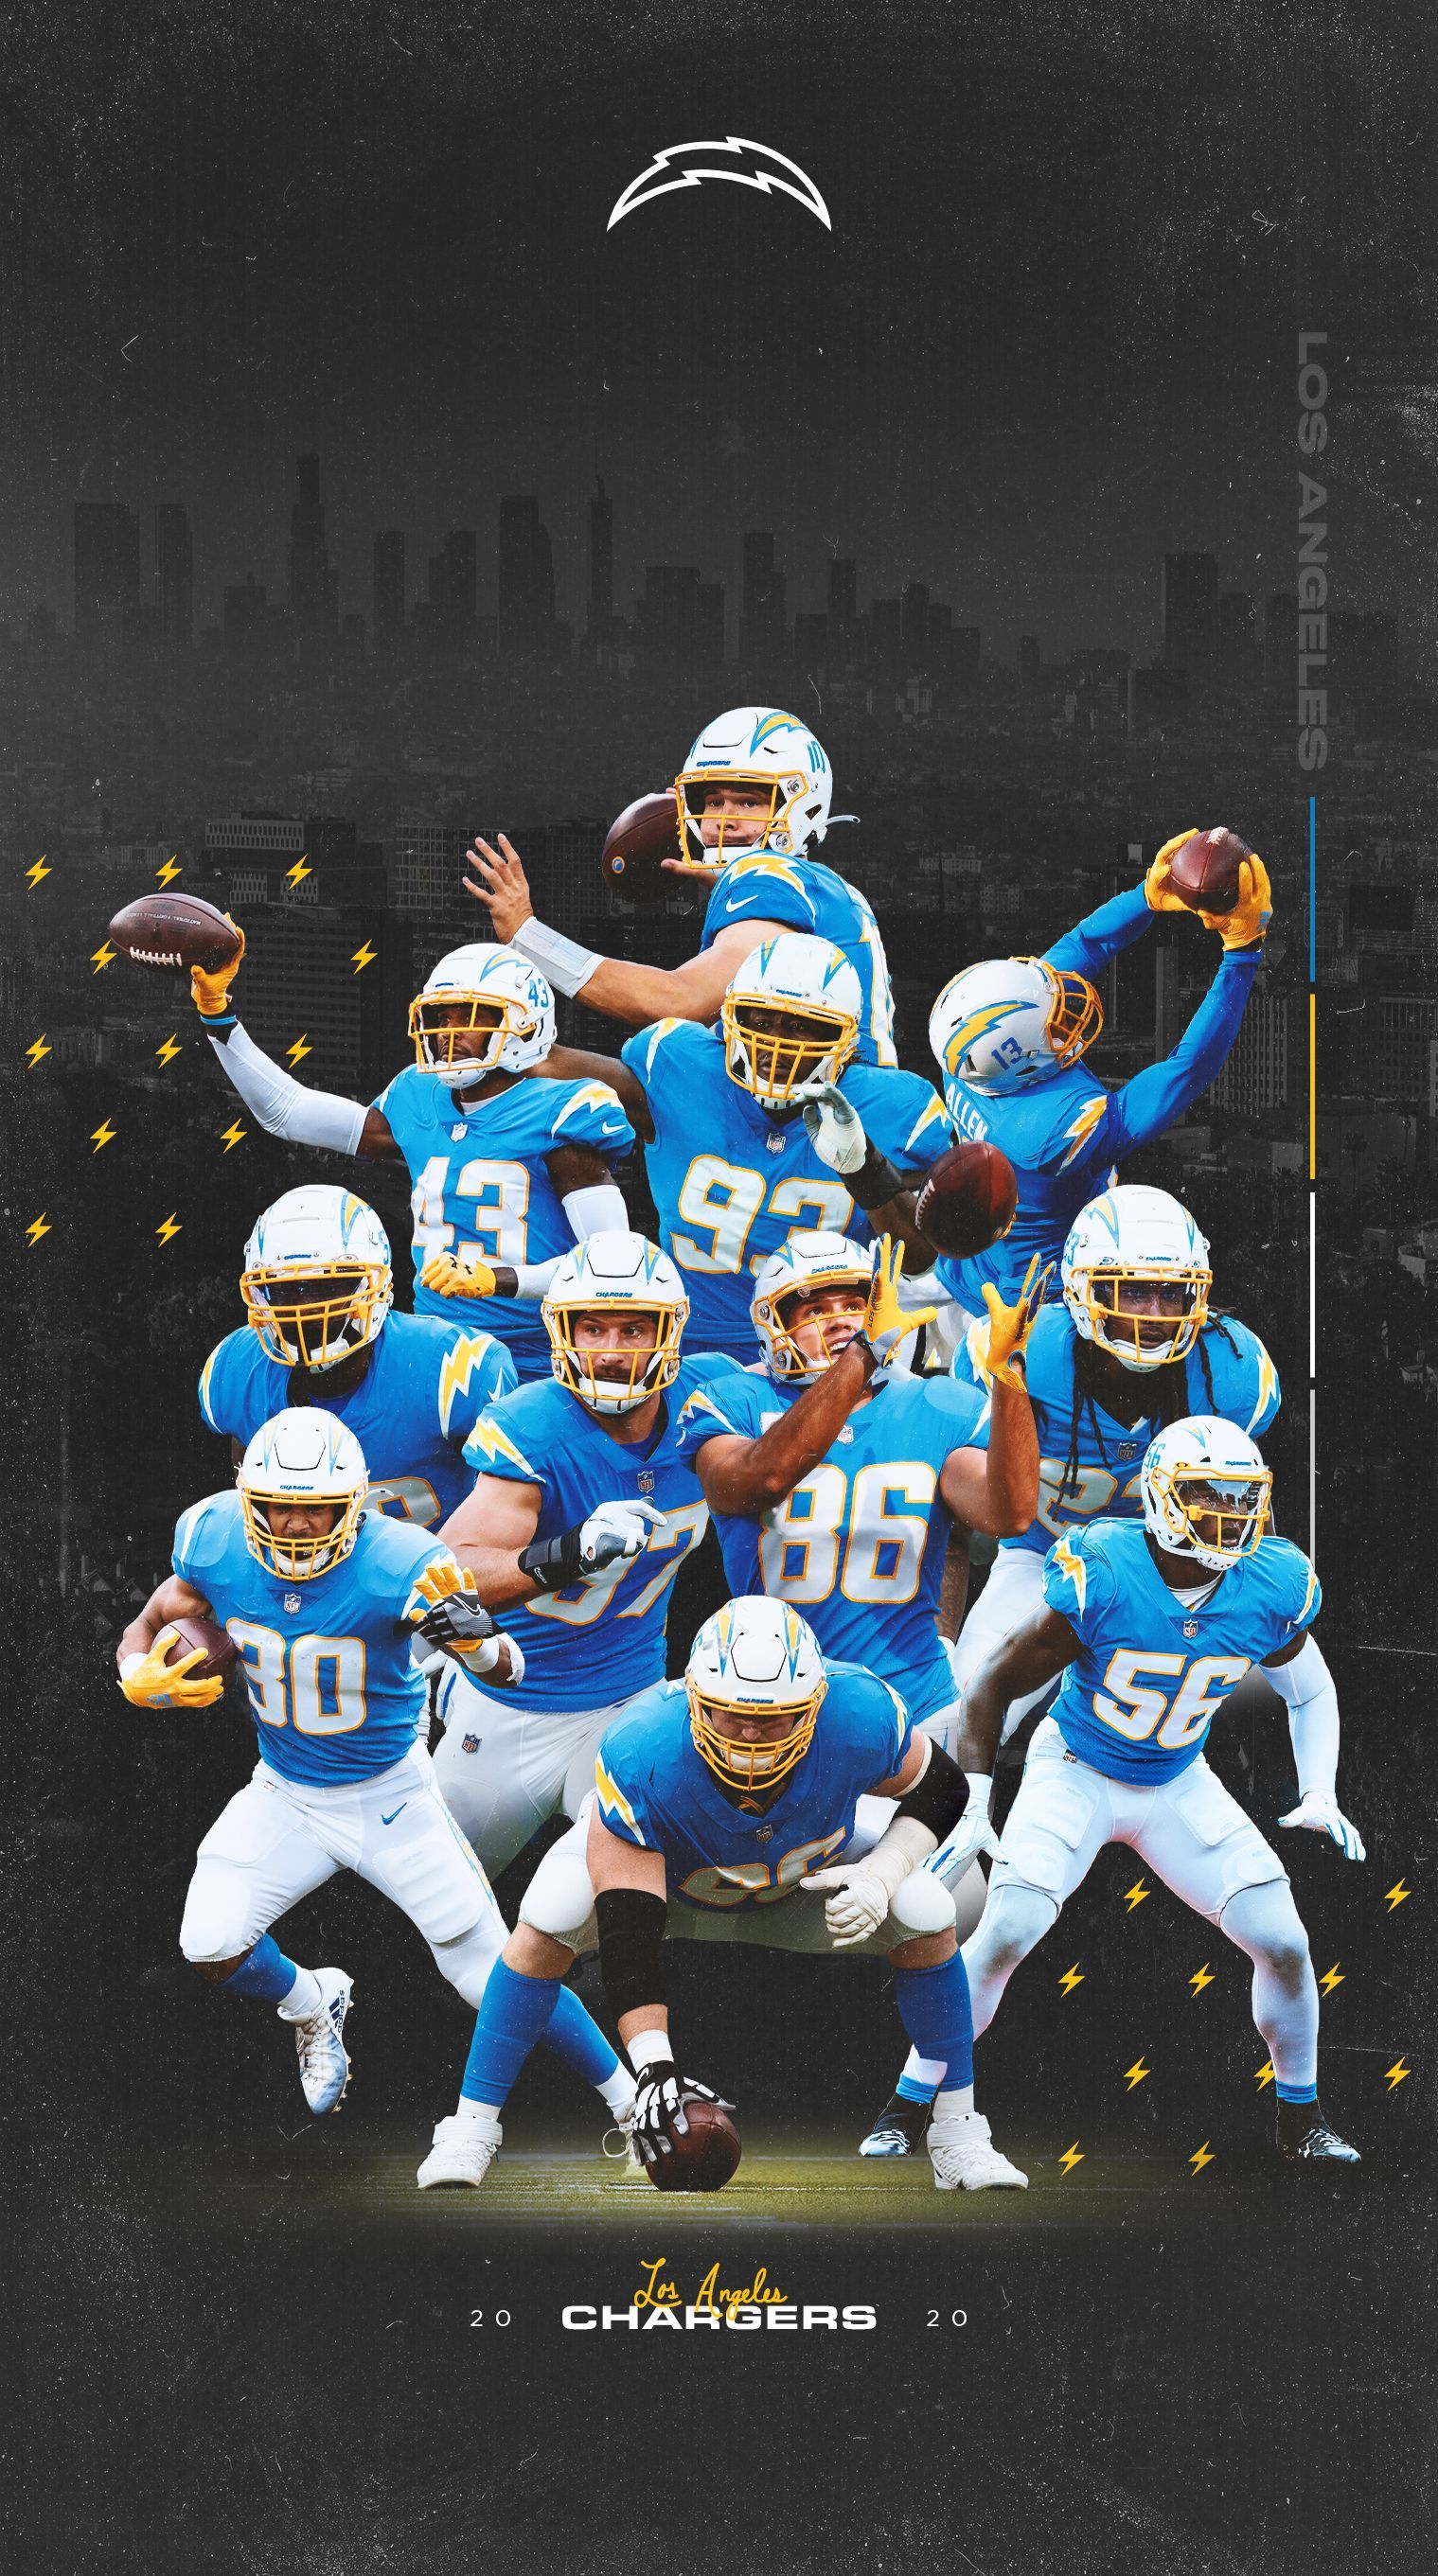 Chargers Wallpaper. Los Angeles .chargers.com